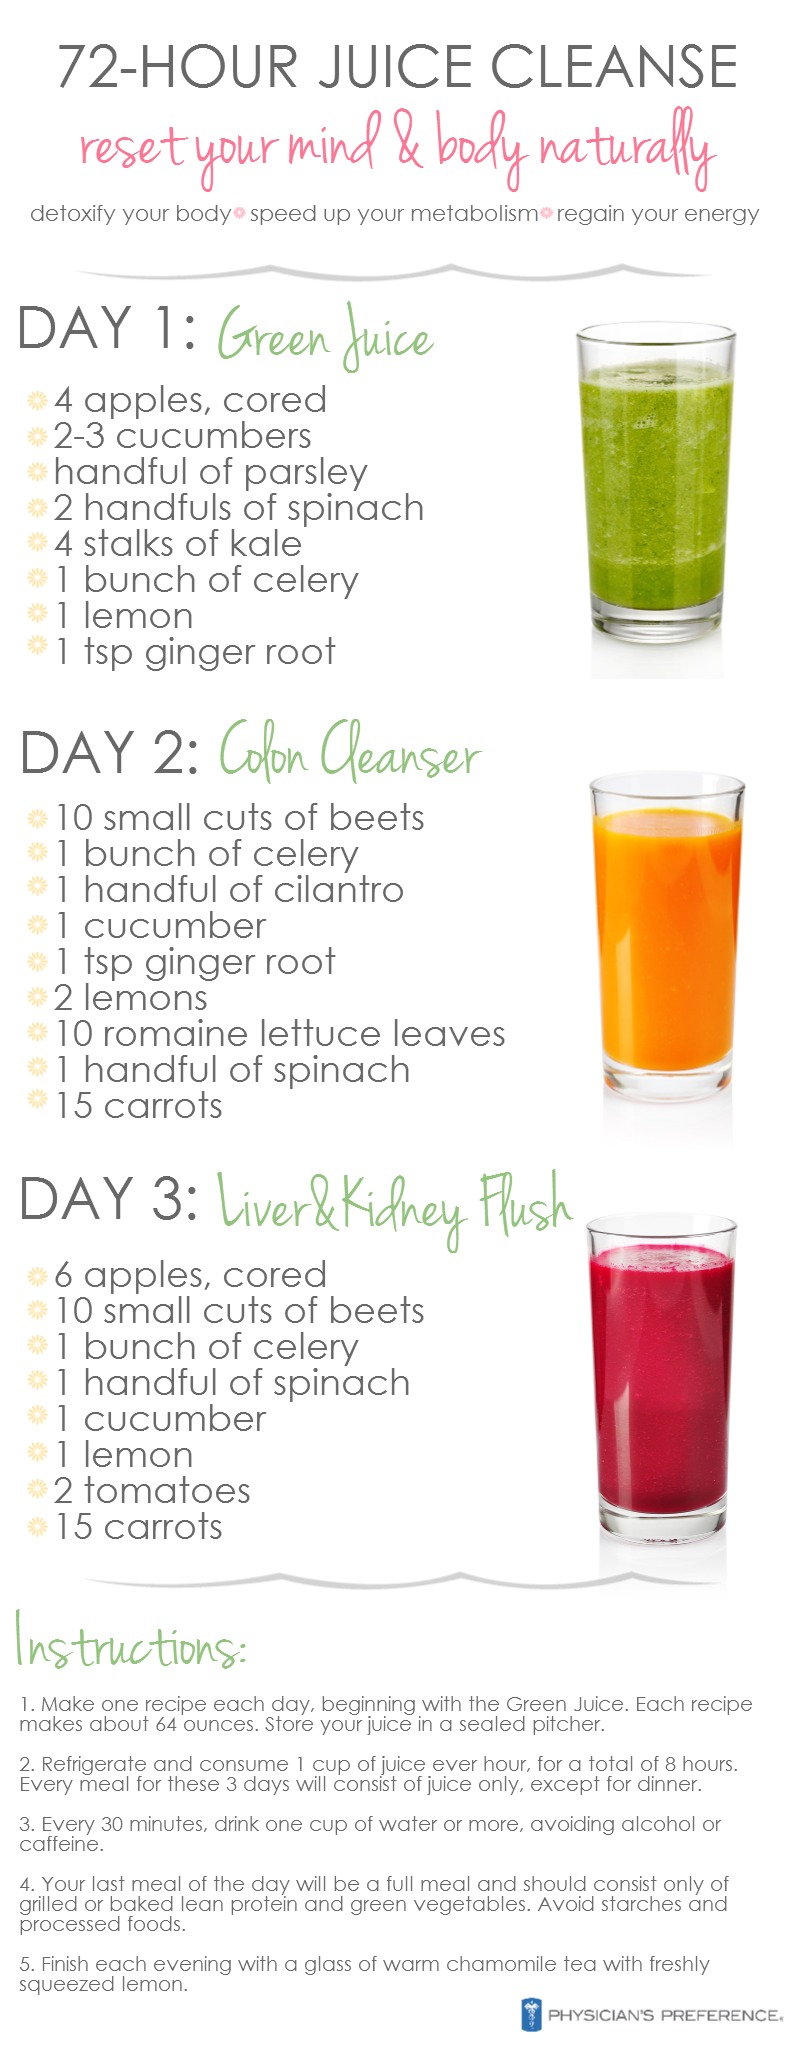 Reset Your Mind And Body With This 72-Hour Juice Cleanse Infographic